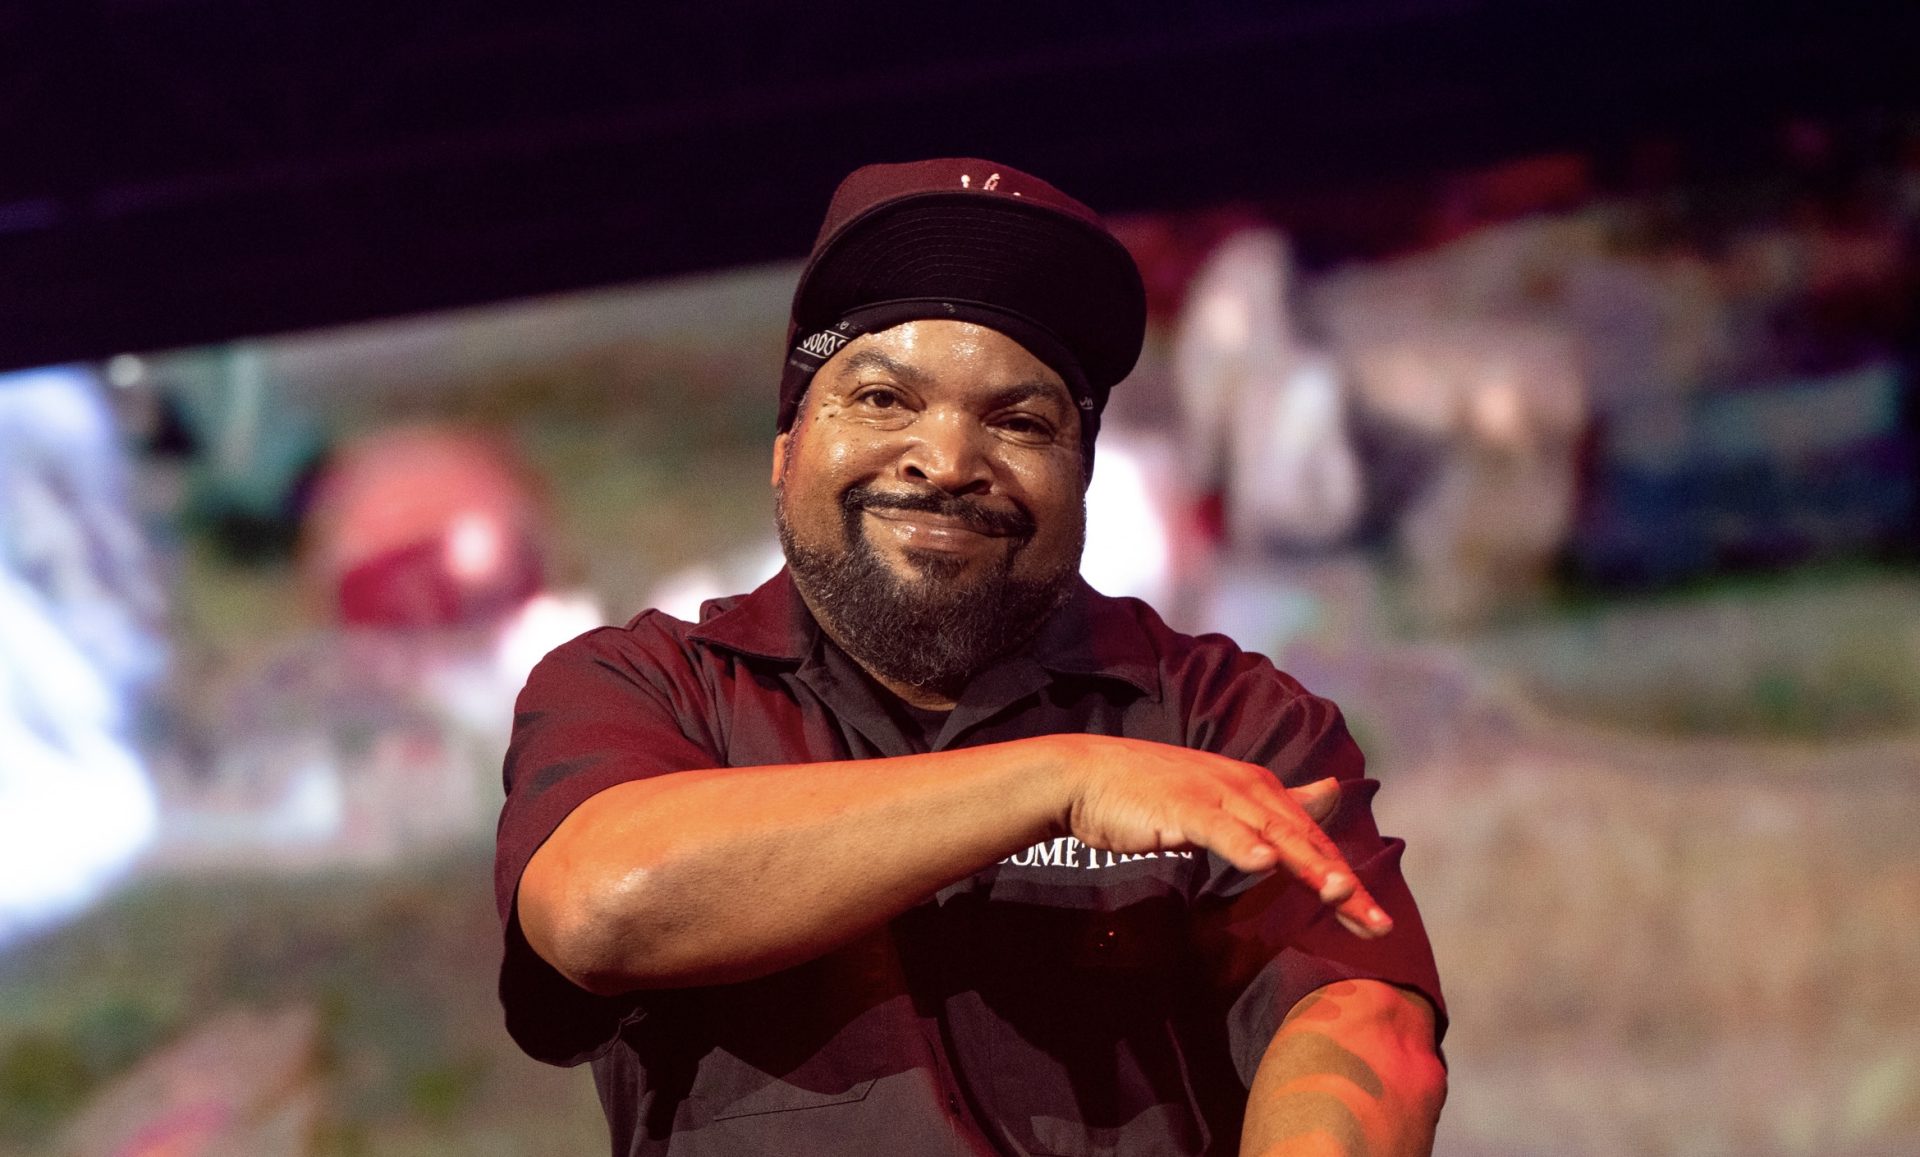 Ice Cube Confirms He Lost $9 Million Role Over COVID-19 Vaccine